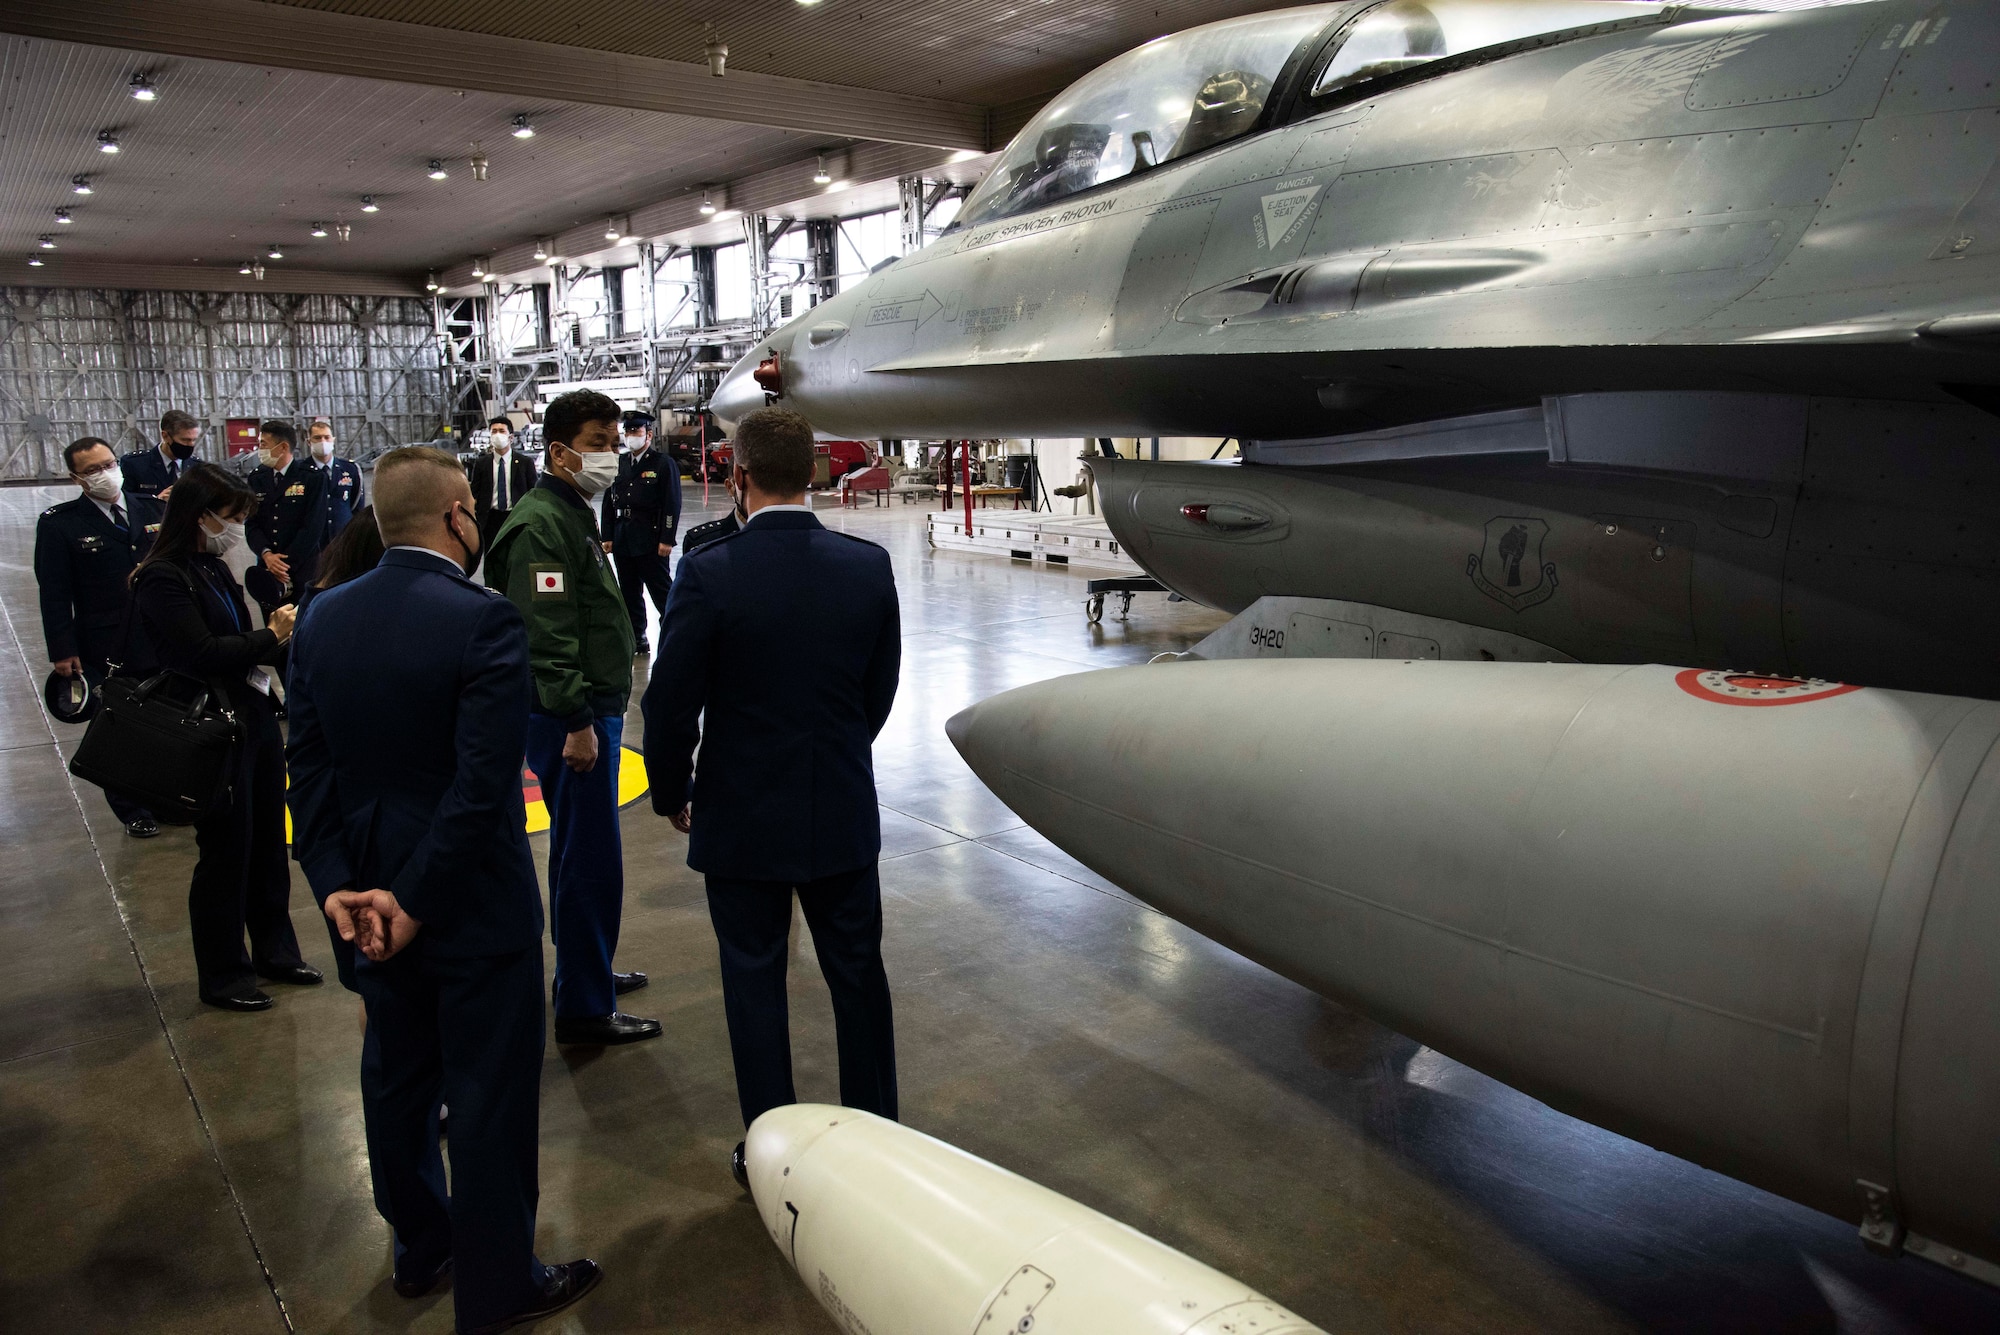 Capt. Austin Bangerter, 13th Fighter Squadron pilot, briefs Japan Minister of Defense, Nobuo Kishi, about the F-16 Fighting Falcon, and the 35th FW’s mission to defend Japan, during a visit at Misawa Air Base on April 3, 2021. During the visit senior leaders emphasized the importance of U.S. and Japanese bilateral interoperability through realistic, high quality training and operations. They also discussed the strategic importance of Misawa Air Base as the premier location for aircraft to conduct training in the Indo-Pacific region. (U.S. Air force photo by Maj. Cody Chiles)